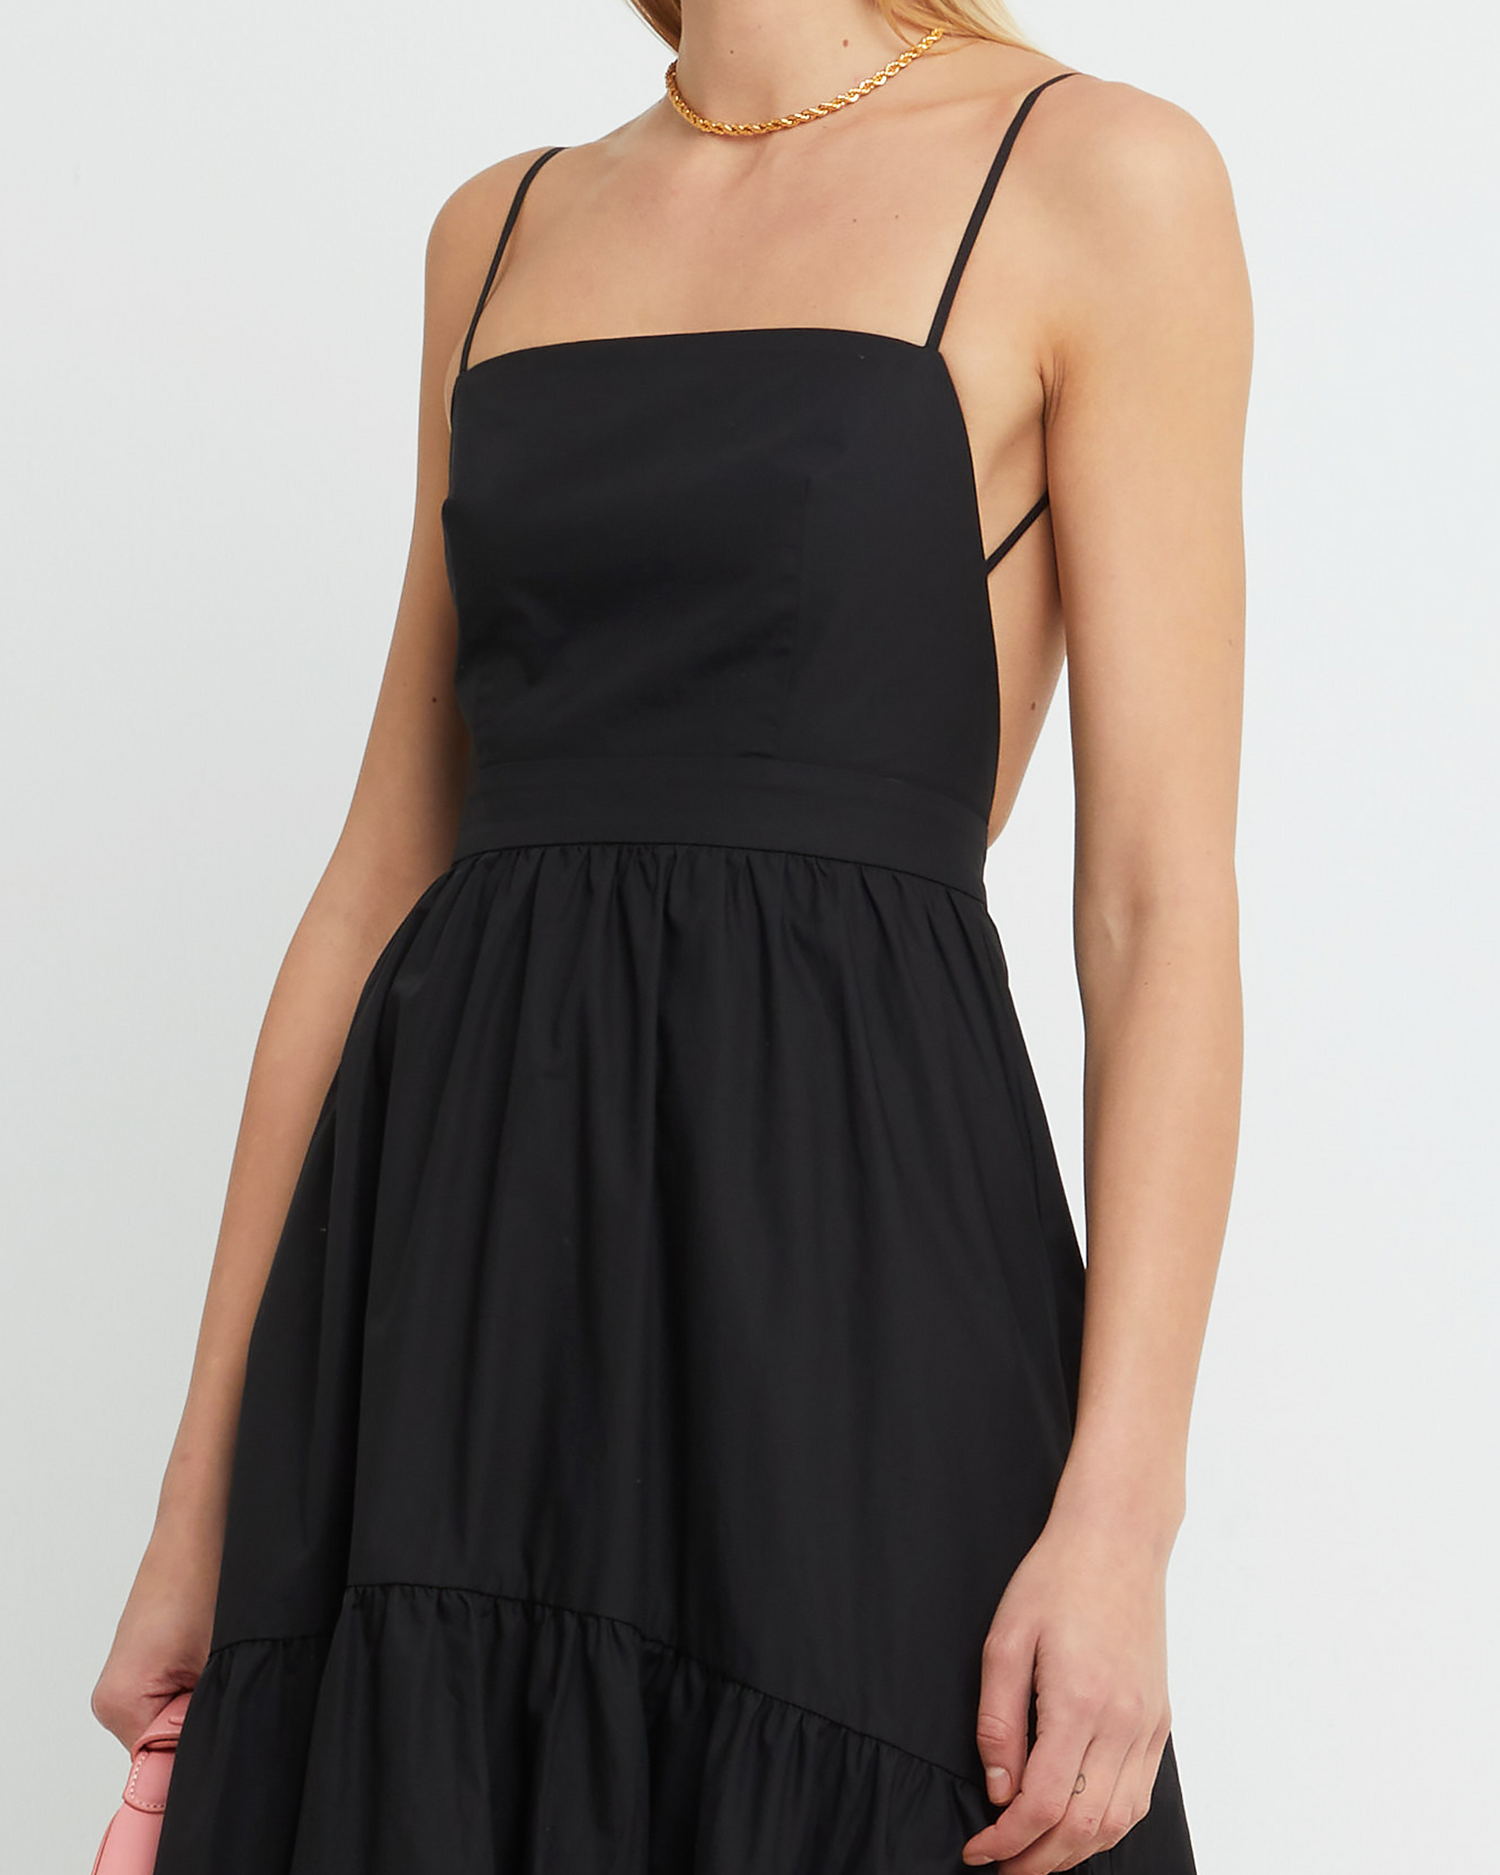 Sixth image of Dionne Cotton Dress, a black maxi dress, spaghette straps, high-low, high low skirt